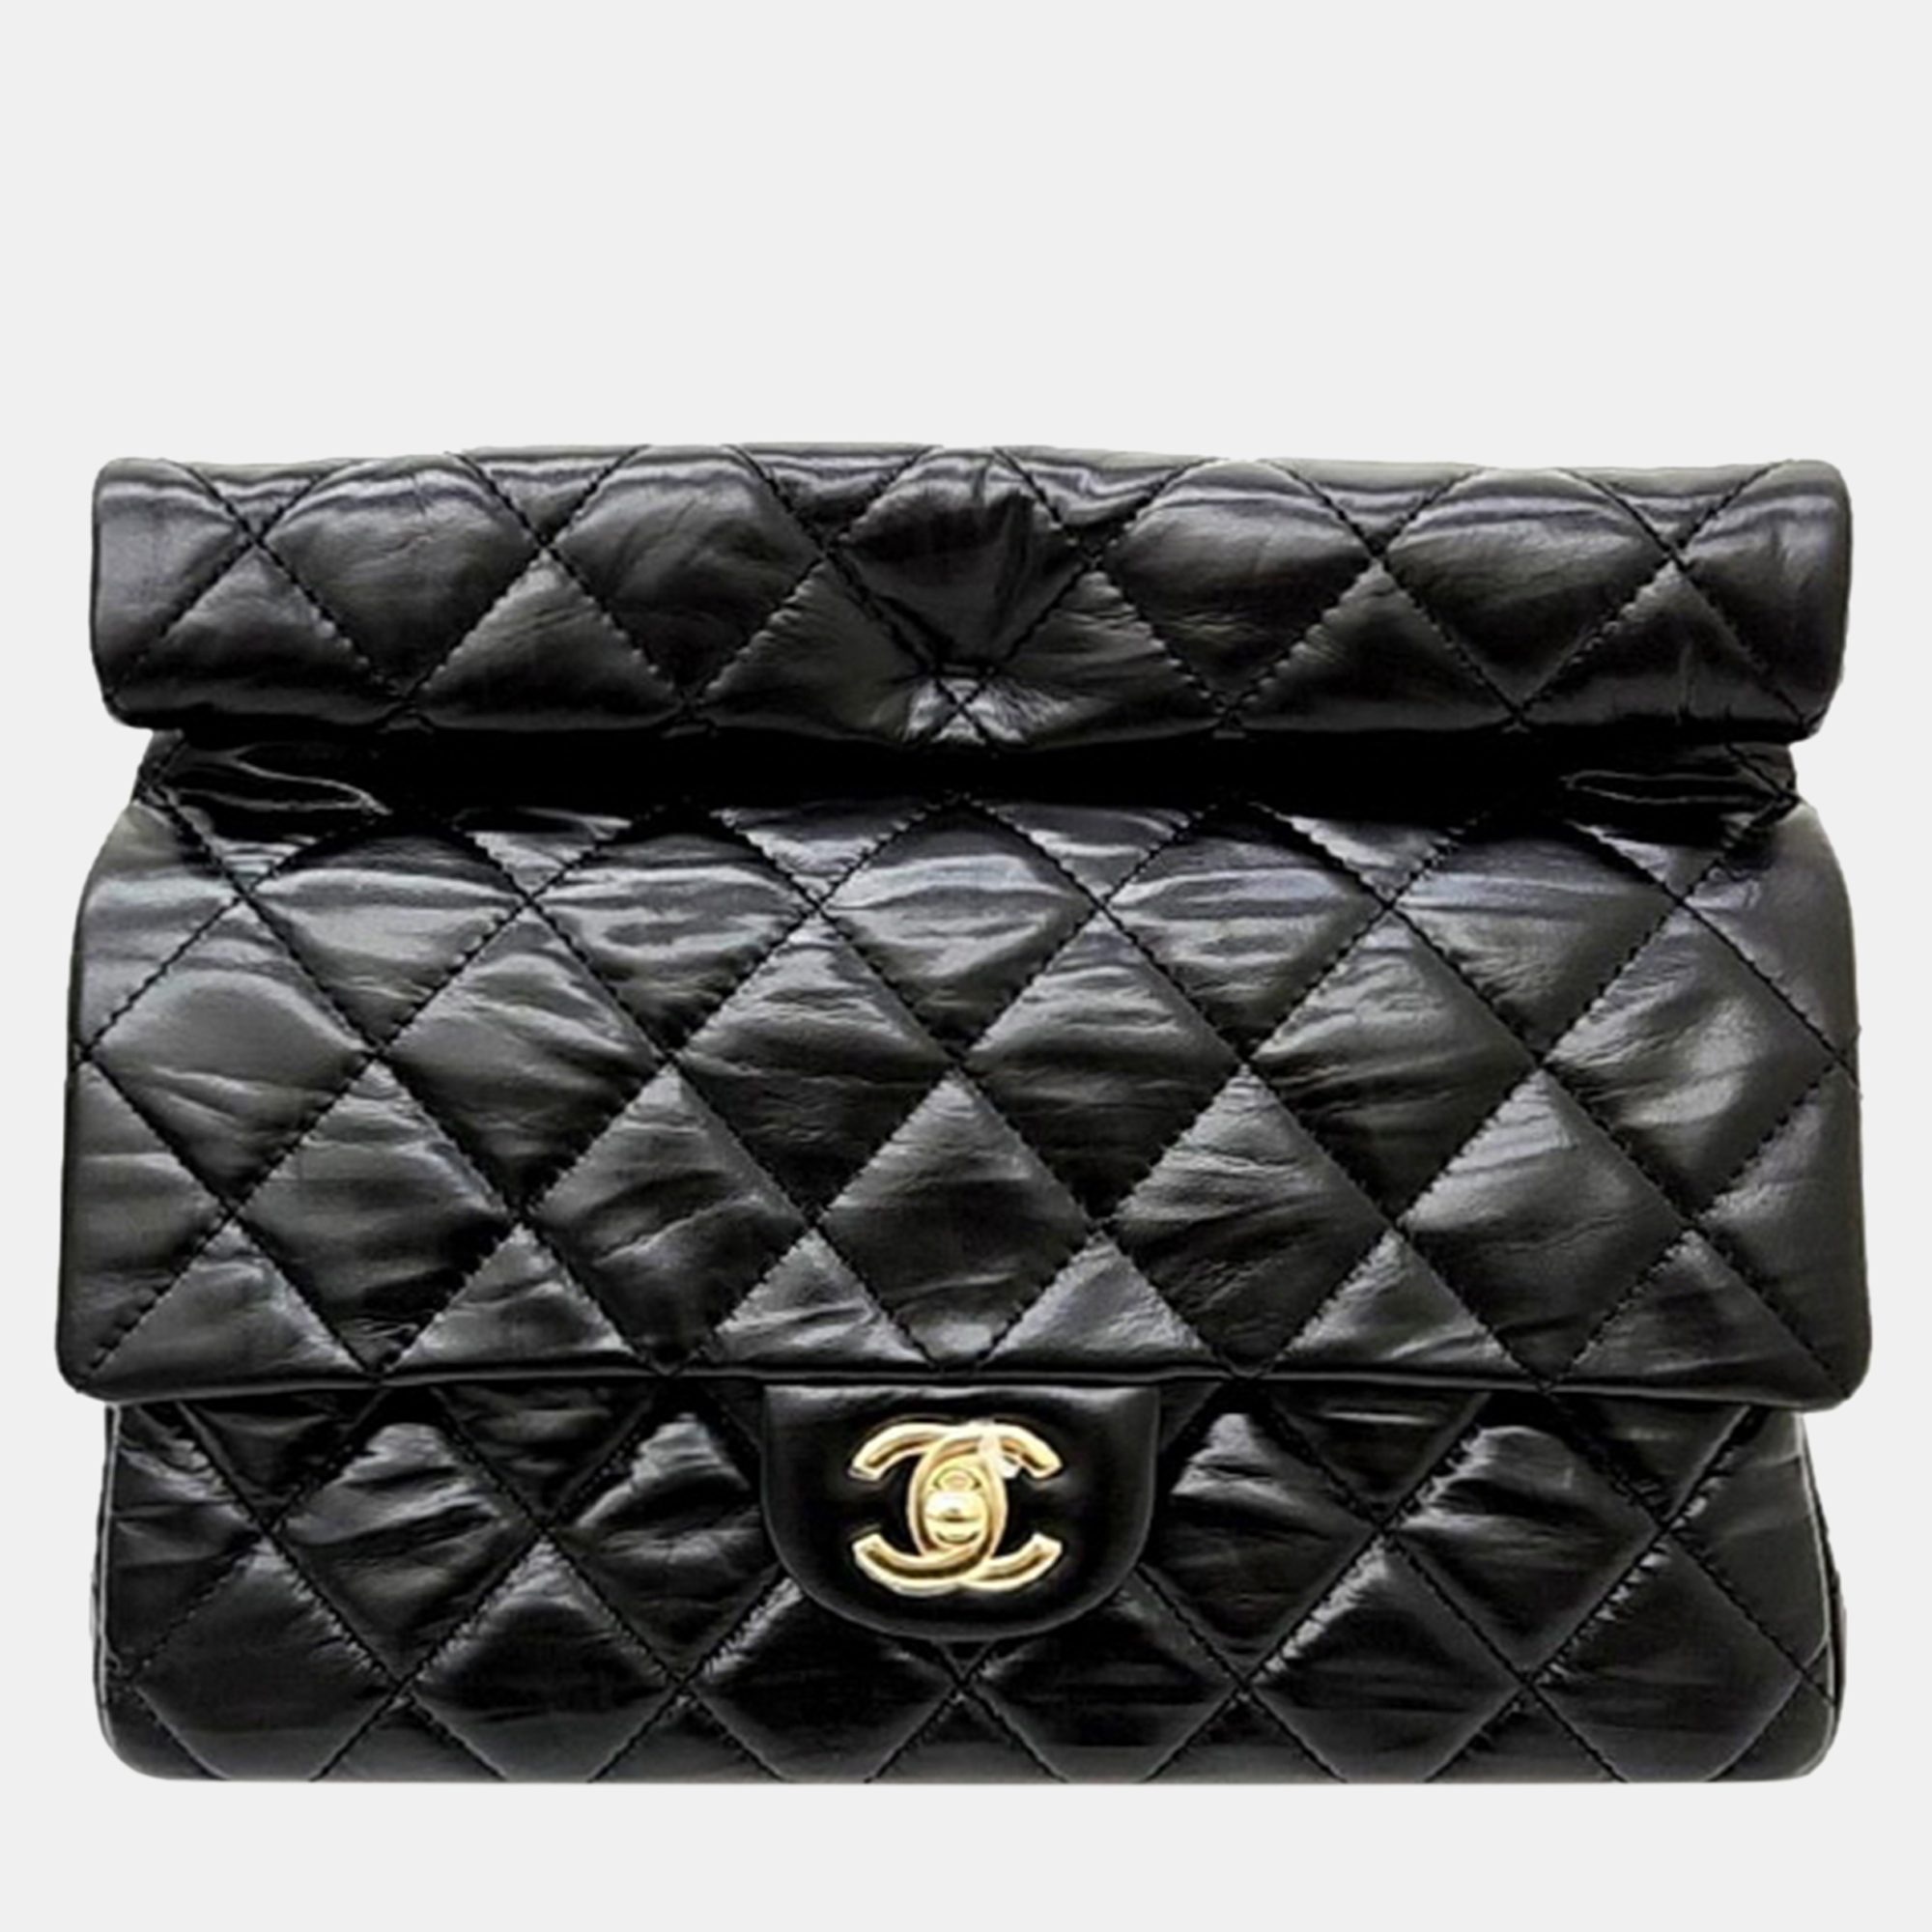 Chanel leather black clutch